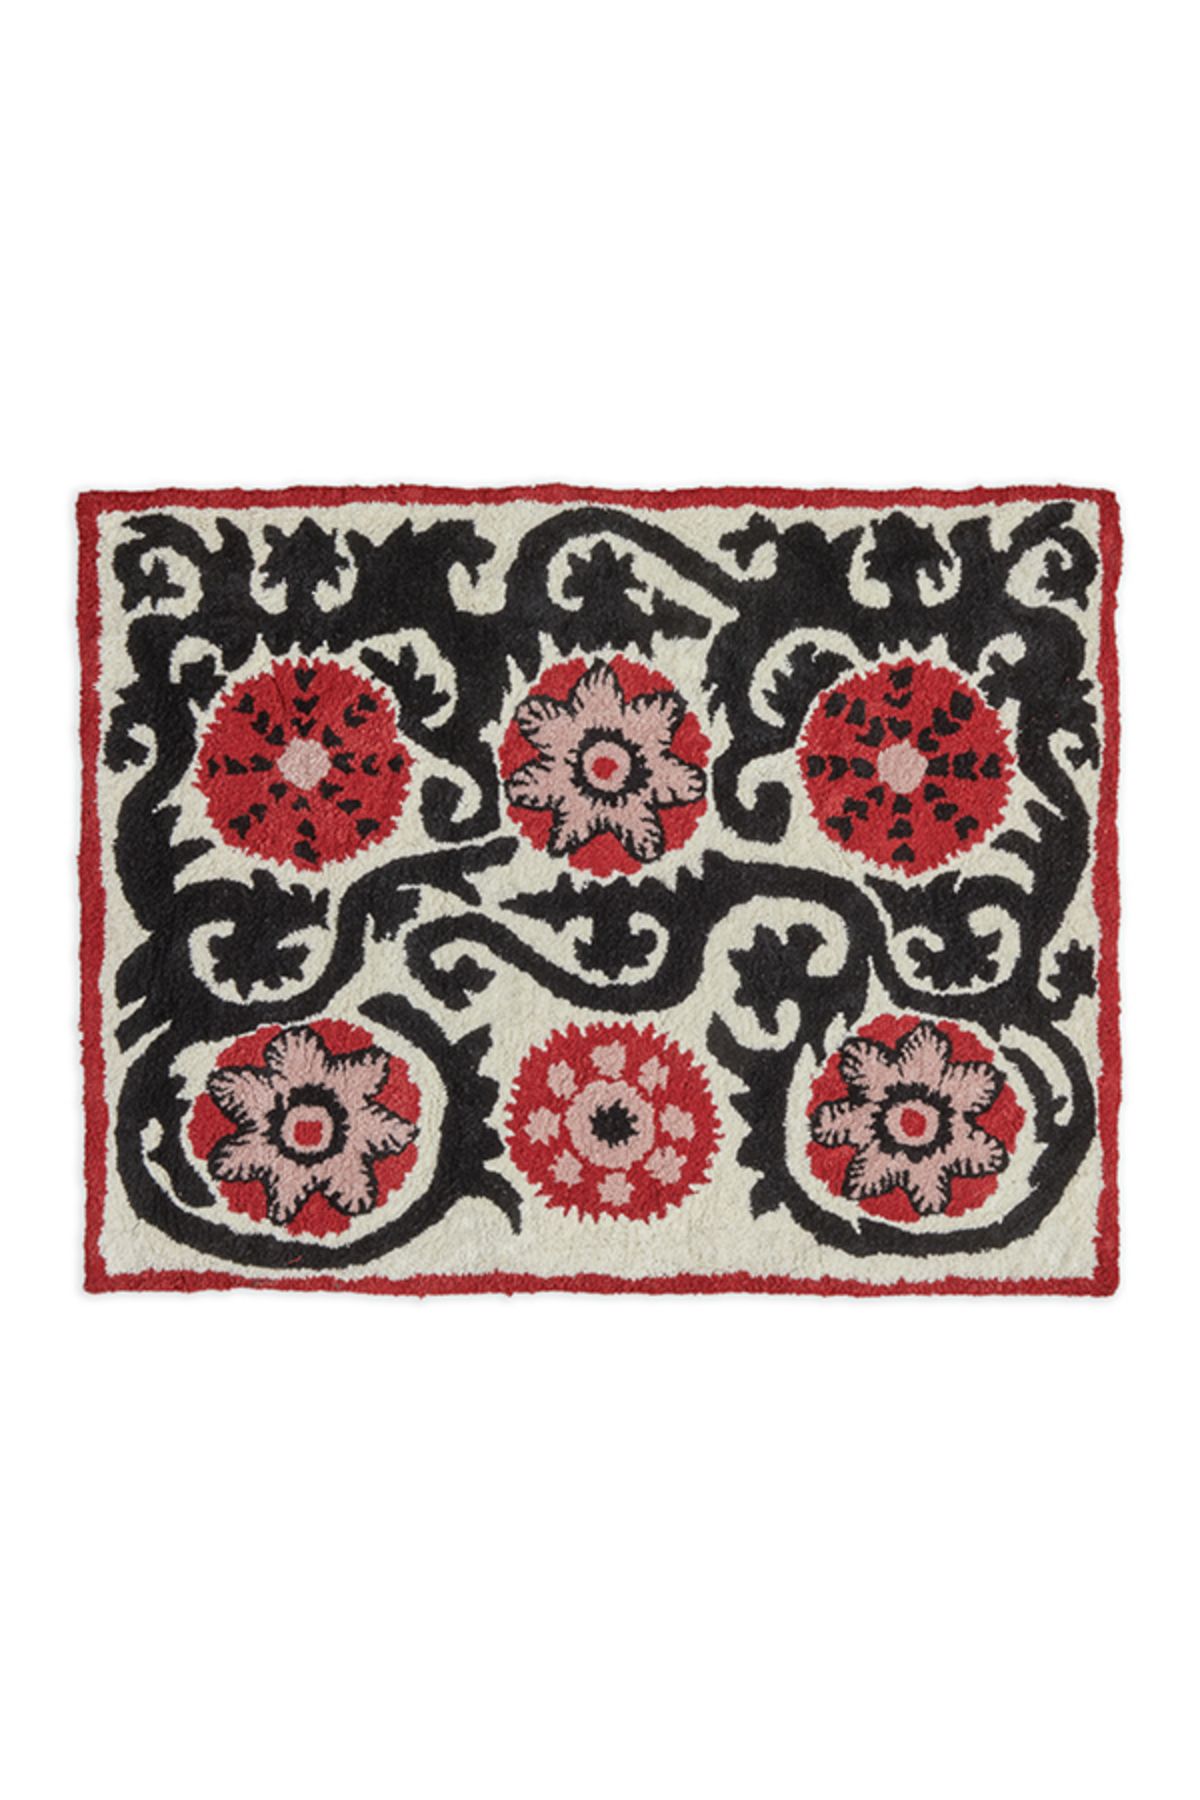 Sole Mio Collection Suzani Wall Rug